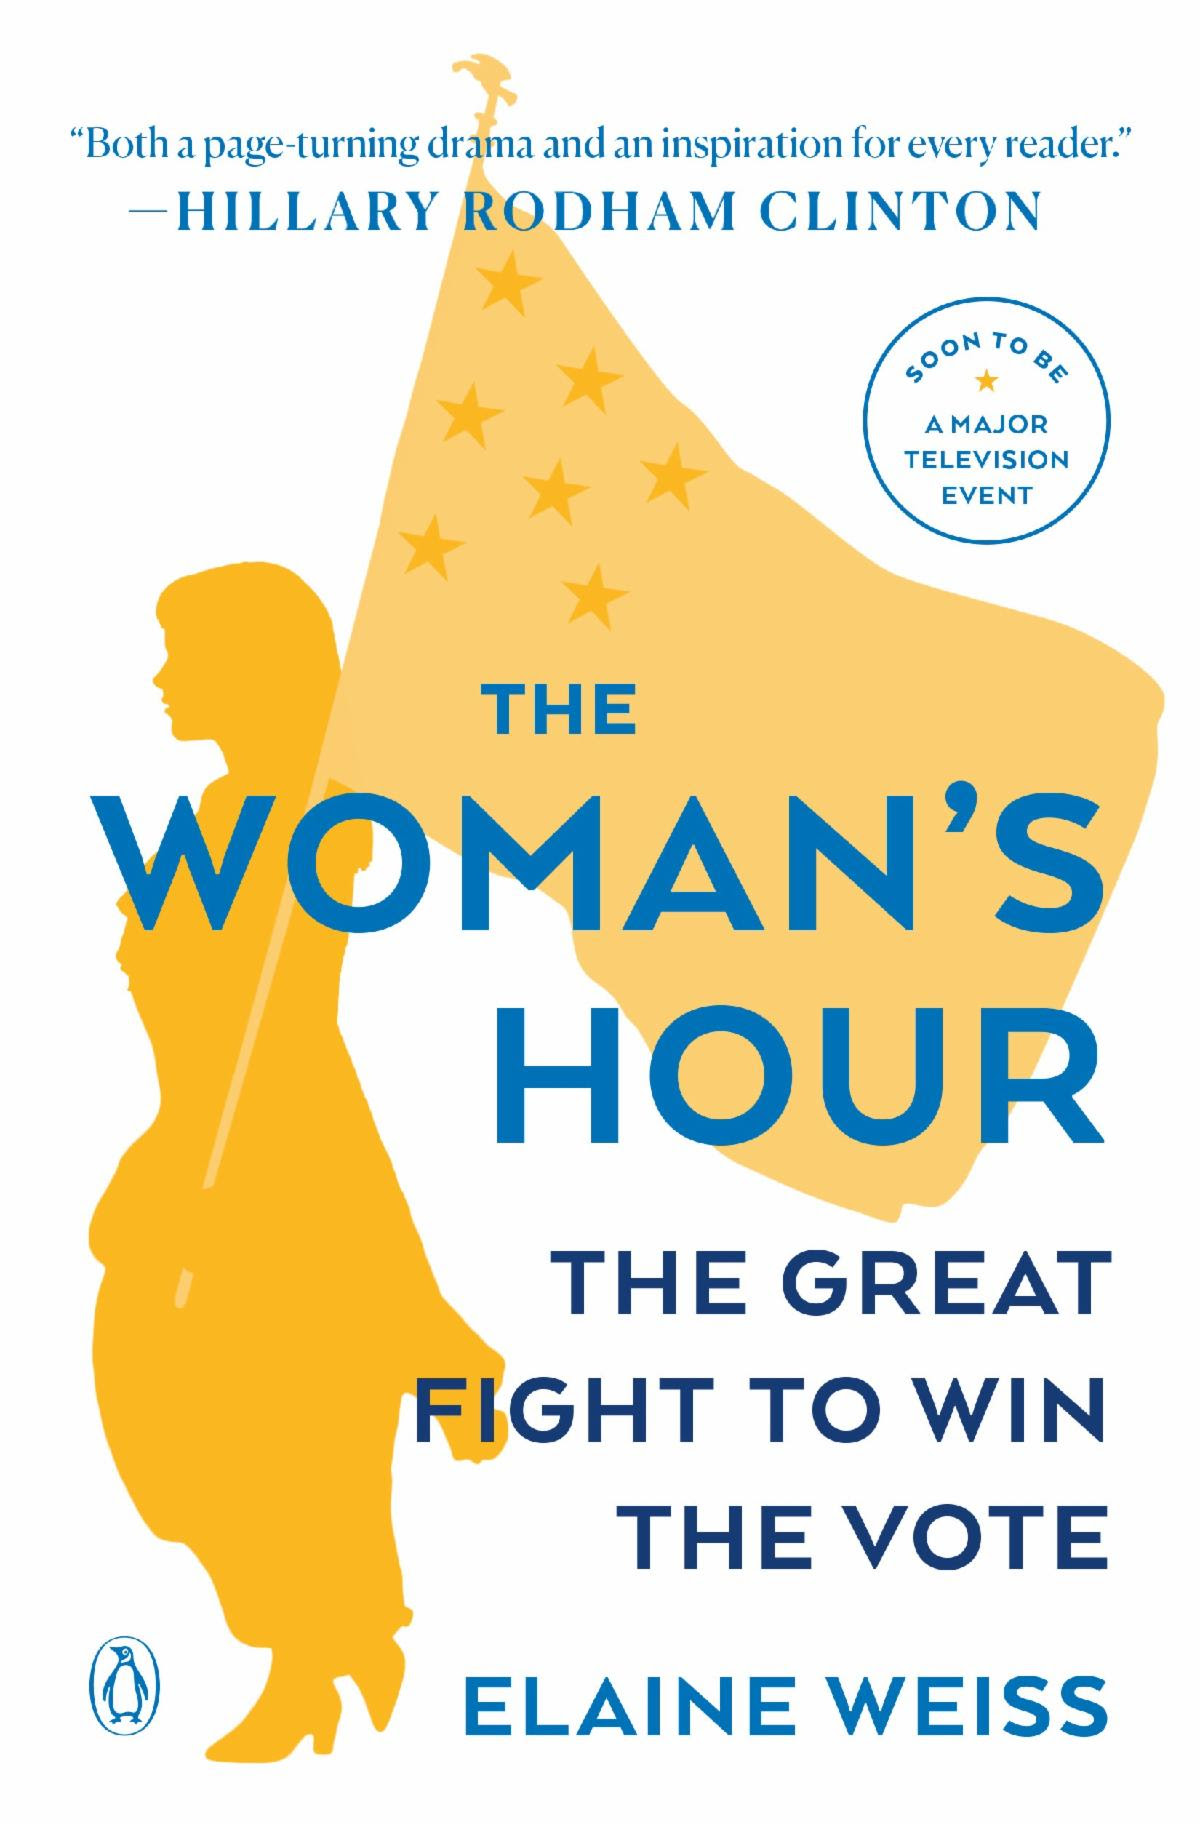 Book Cover Image for The Woman's Hour: The Great Fight to Win the Vote by Elaine Weiss 